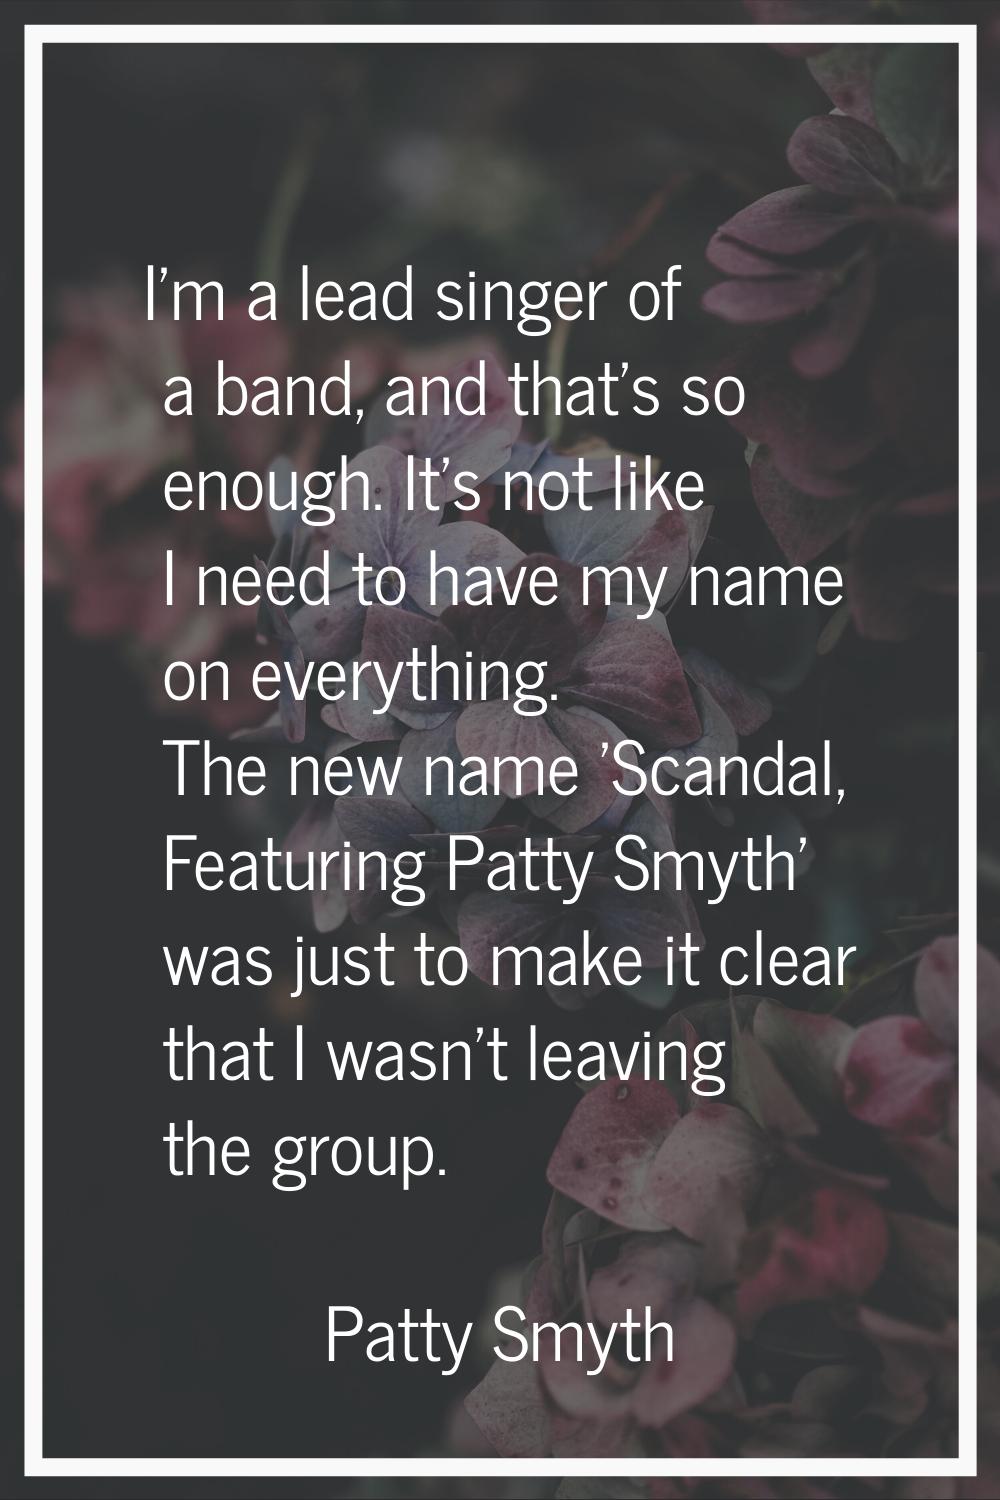 I'm a lead singer of a band, and that's so enough. It's not like I need to have my name on everythi